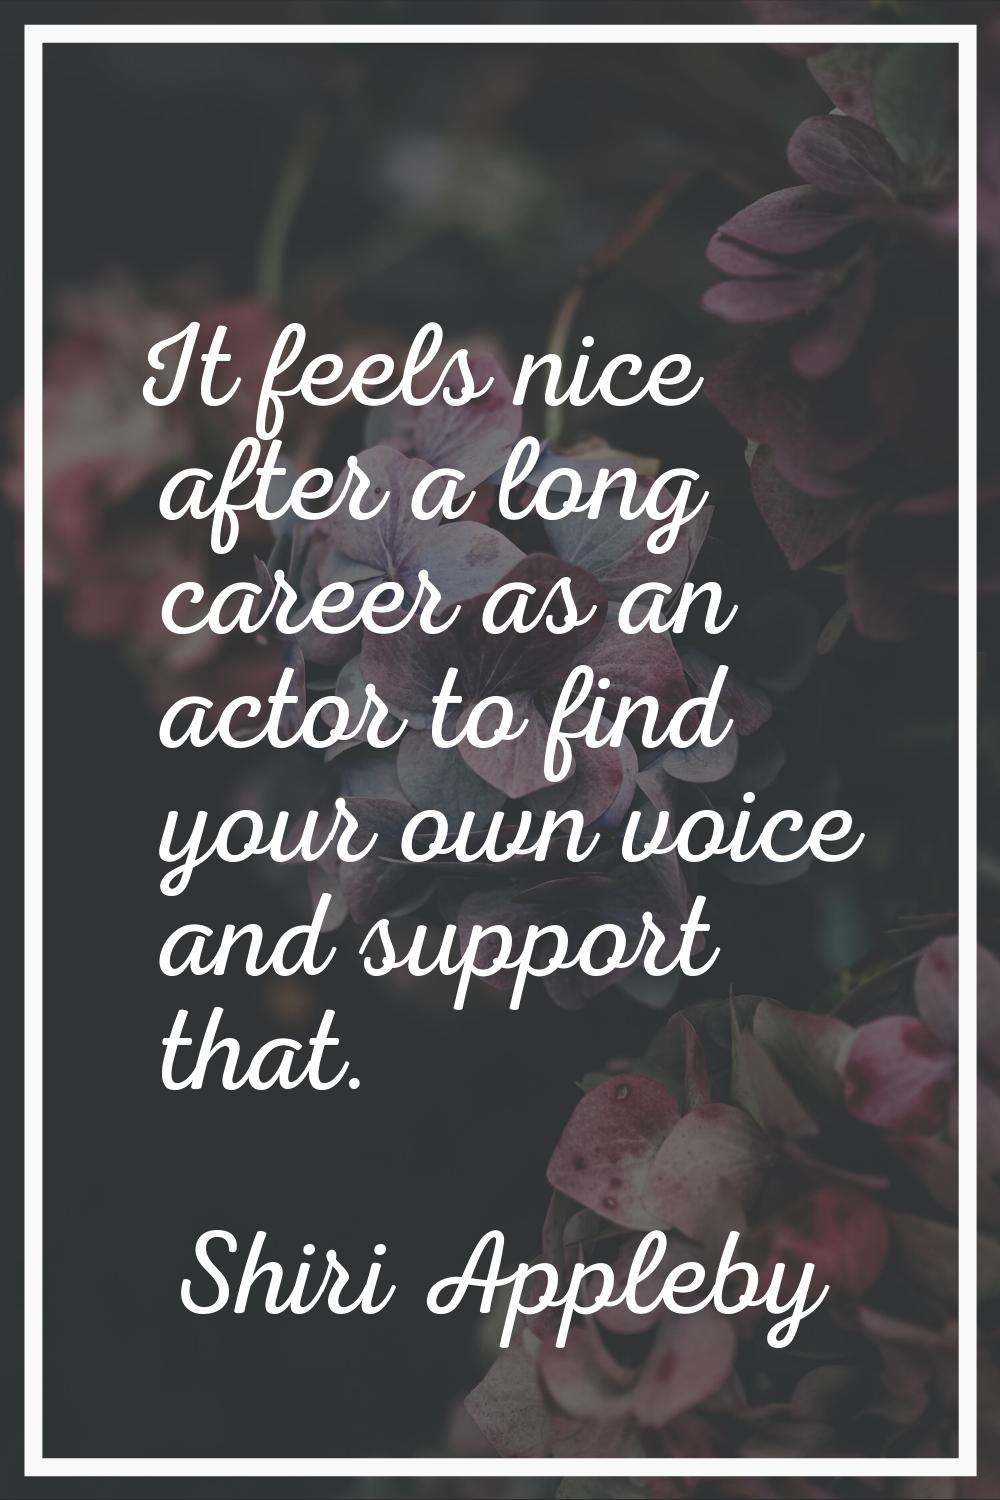 It feels nice after a long career as an actor to find your own voice and support that.